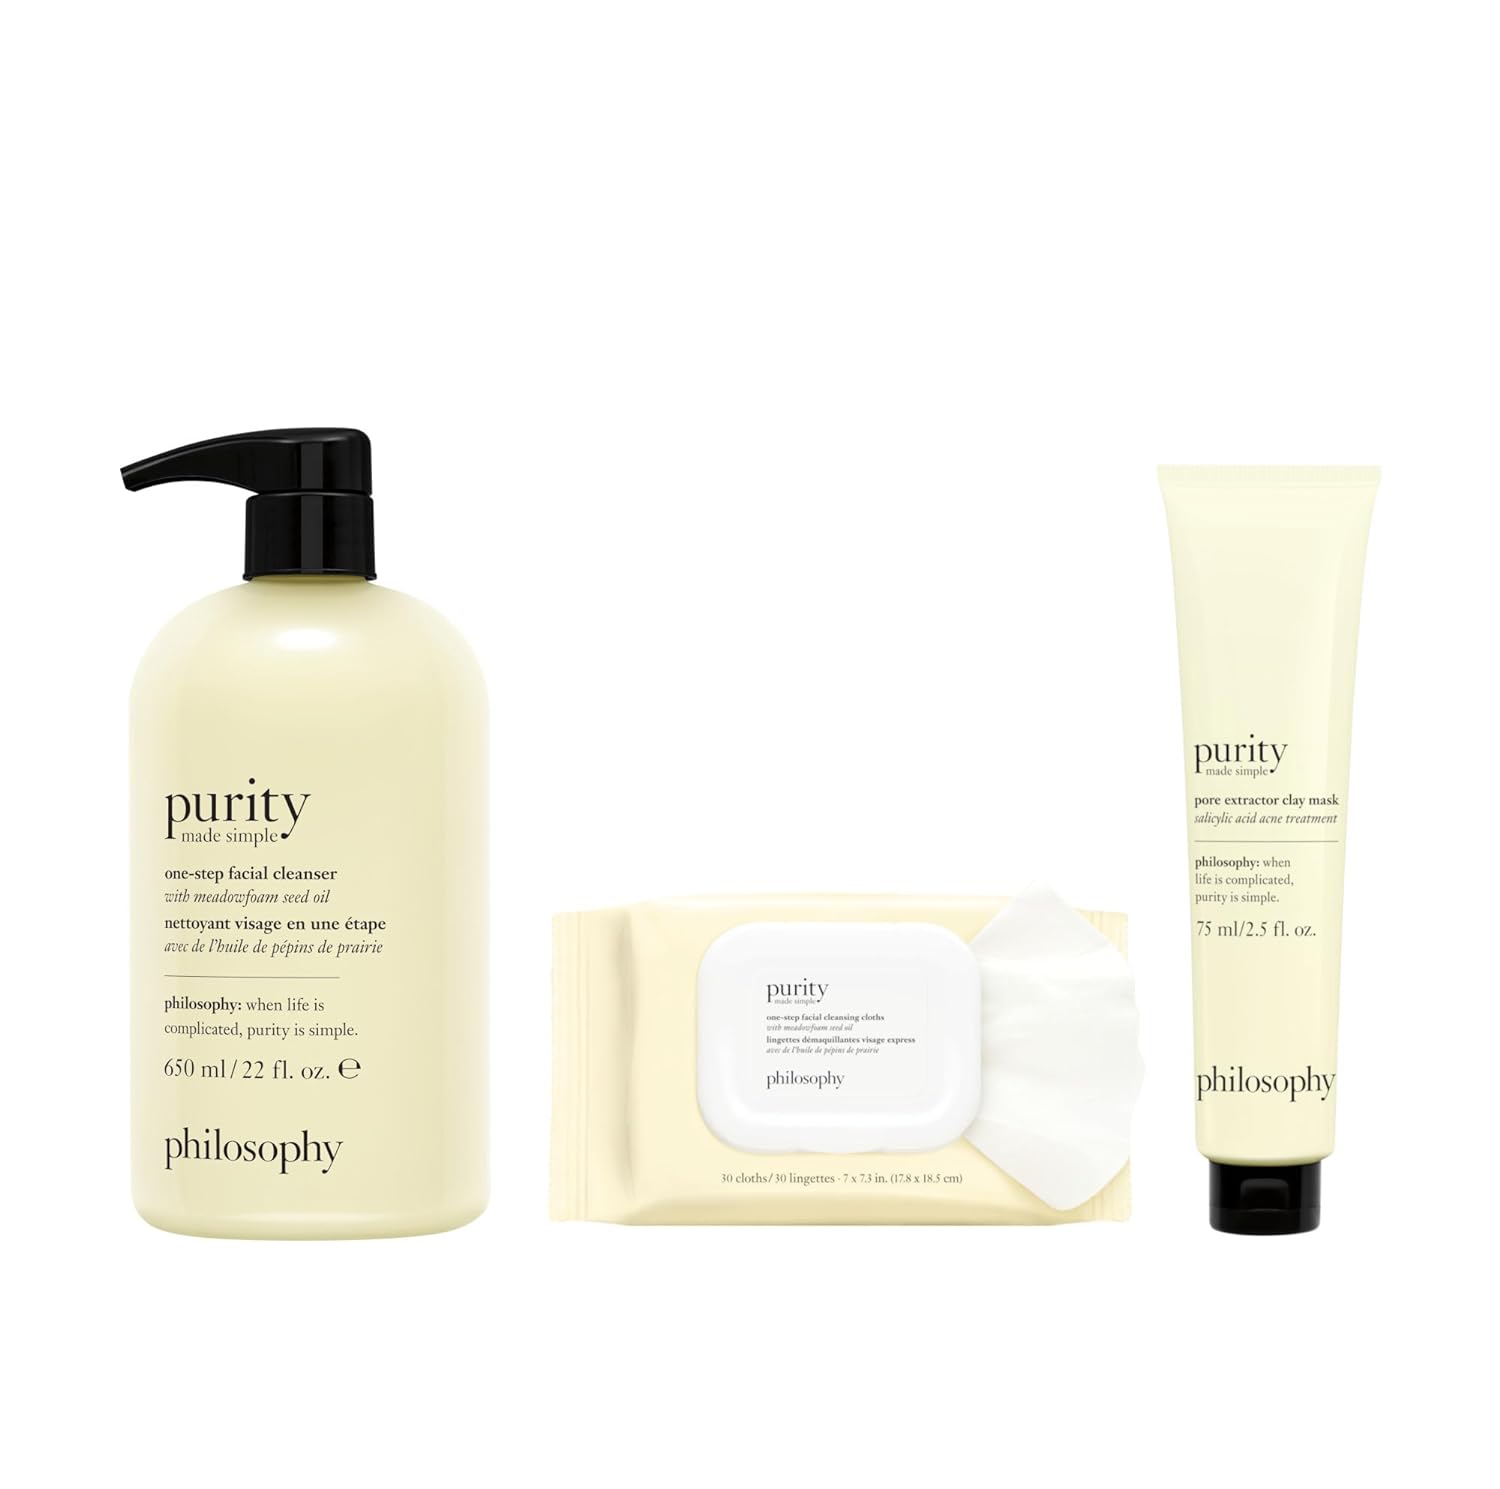 Bundle of philosophy purity made simple -one-step facial cleansing cloths, facial cleanser + pore extractor mask